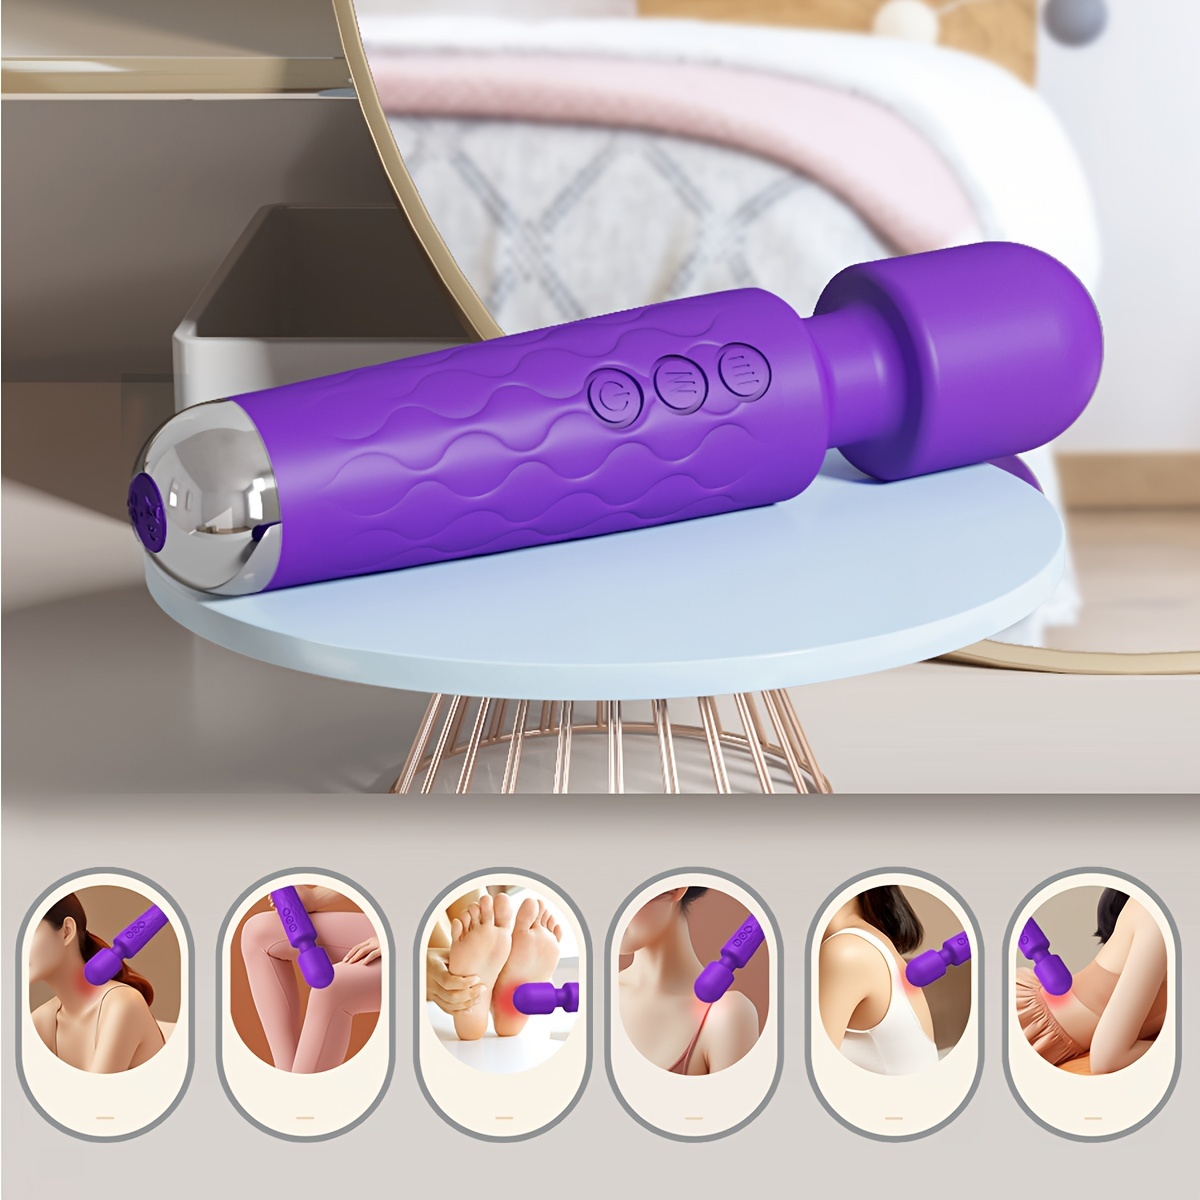  Heated Vibration Massage Bra, Adjustable 3 Speed Modes USB  Rechargeable Enhancement Massager Shaping Beautiful Chest For Improve  Health : Health & Household